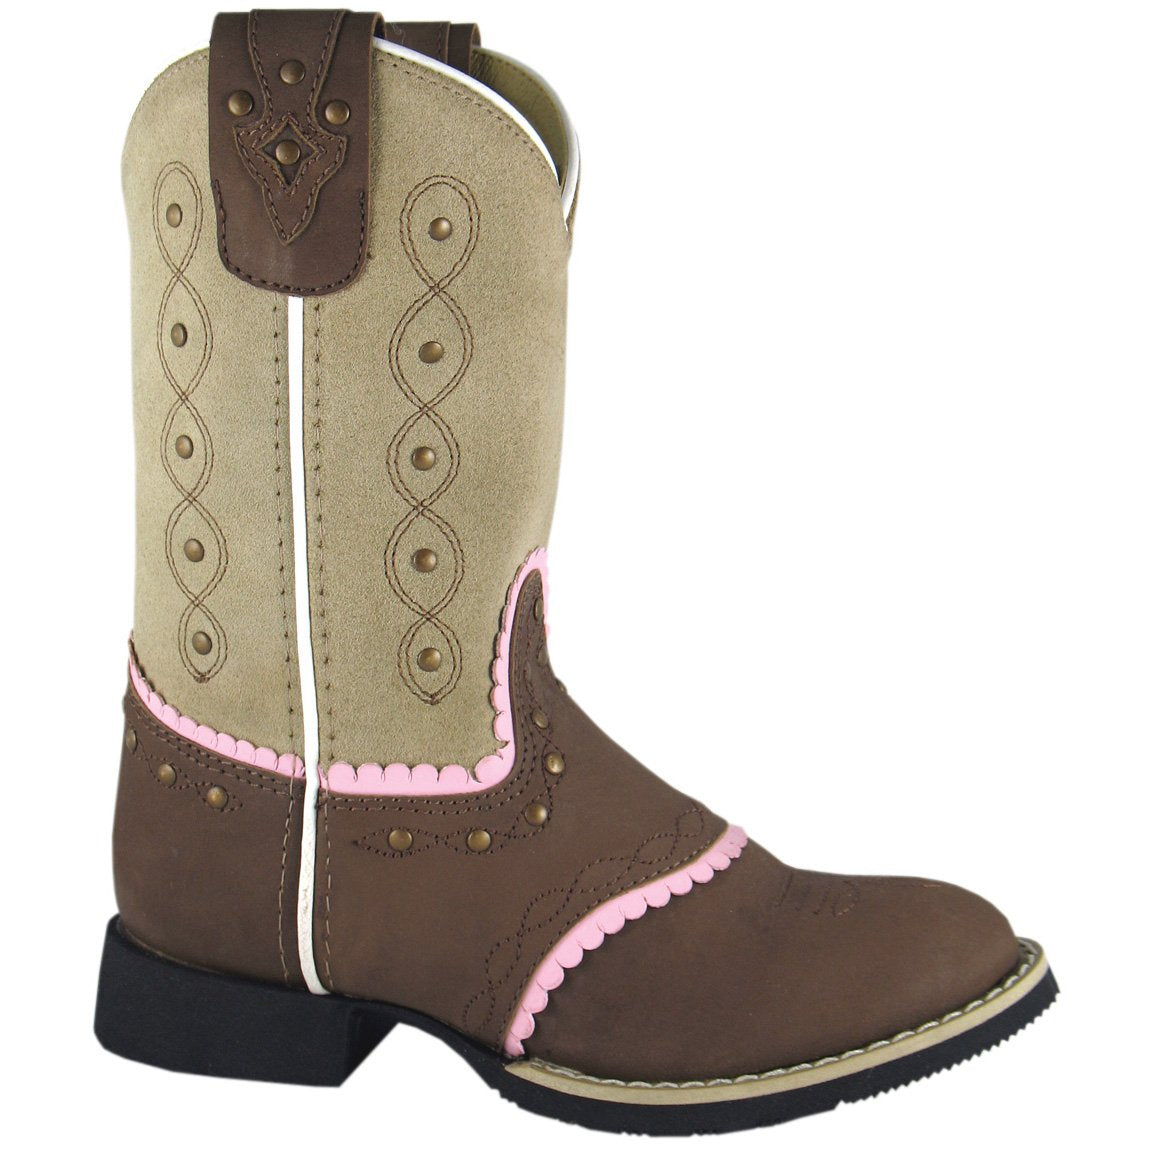 Smoky Mountain Girl's Youth Brown/Beige Western Boot With Pink Trim